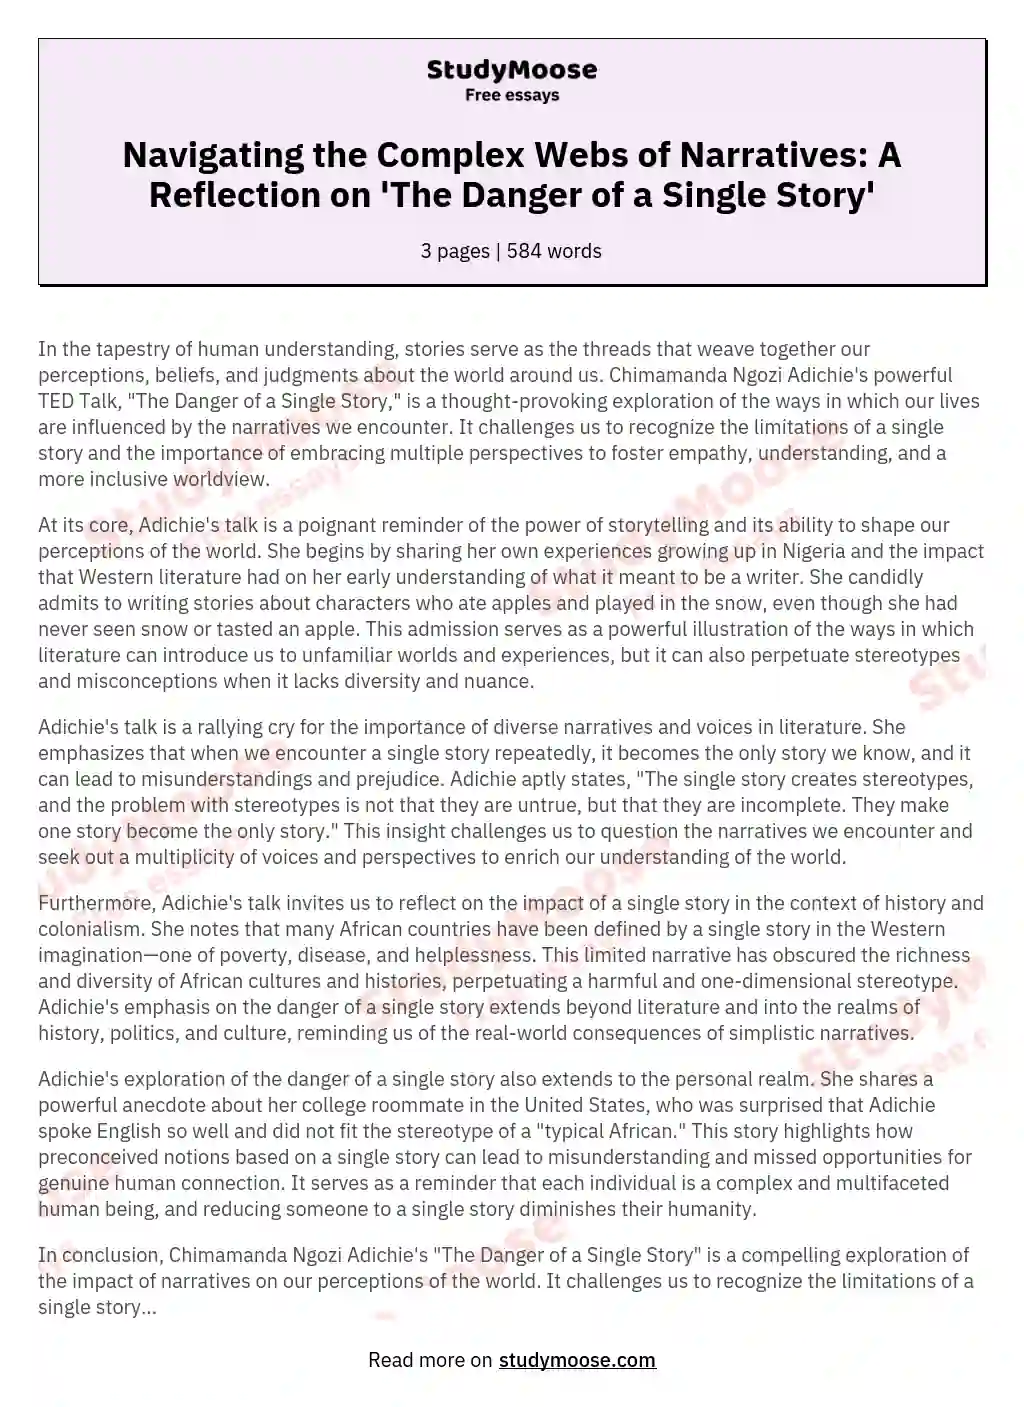 Navigating the Complex Webs of Narratives: A Reflection on 'The Danger of a Single Story' essay